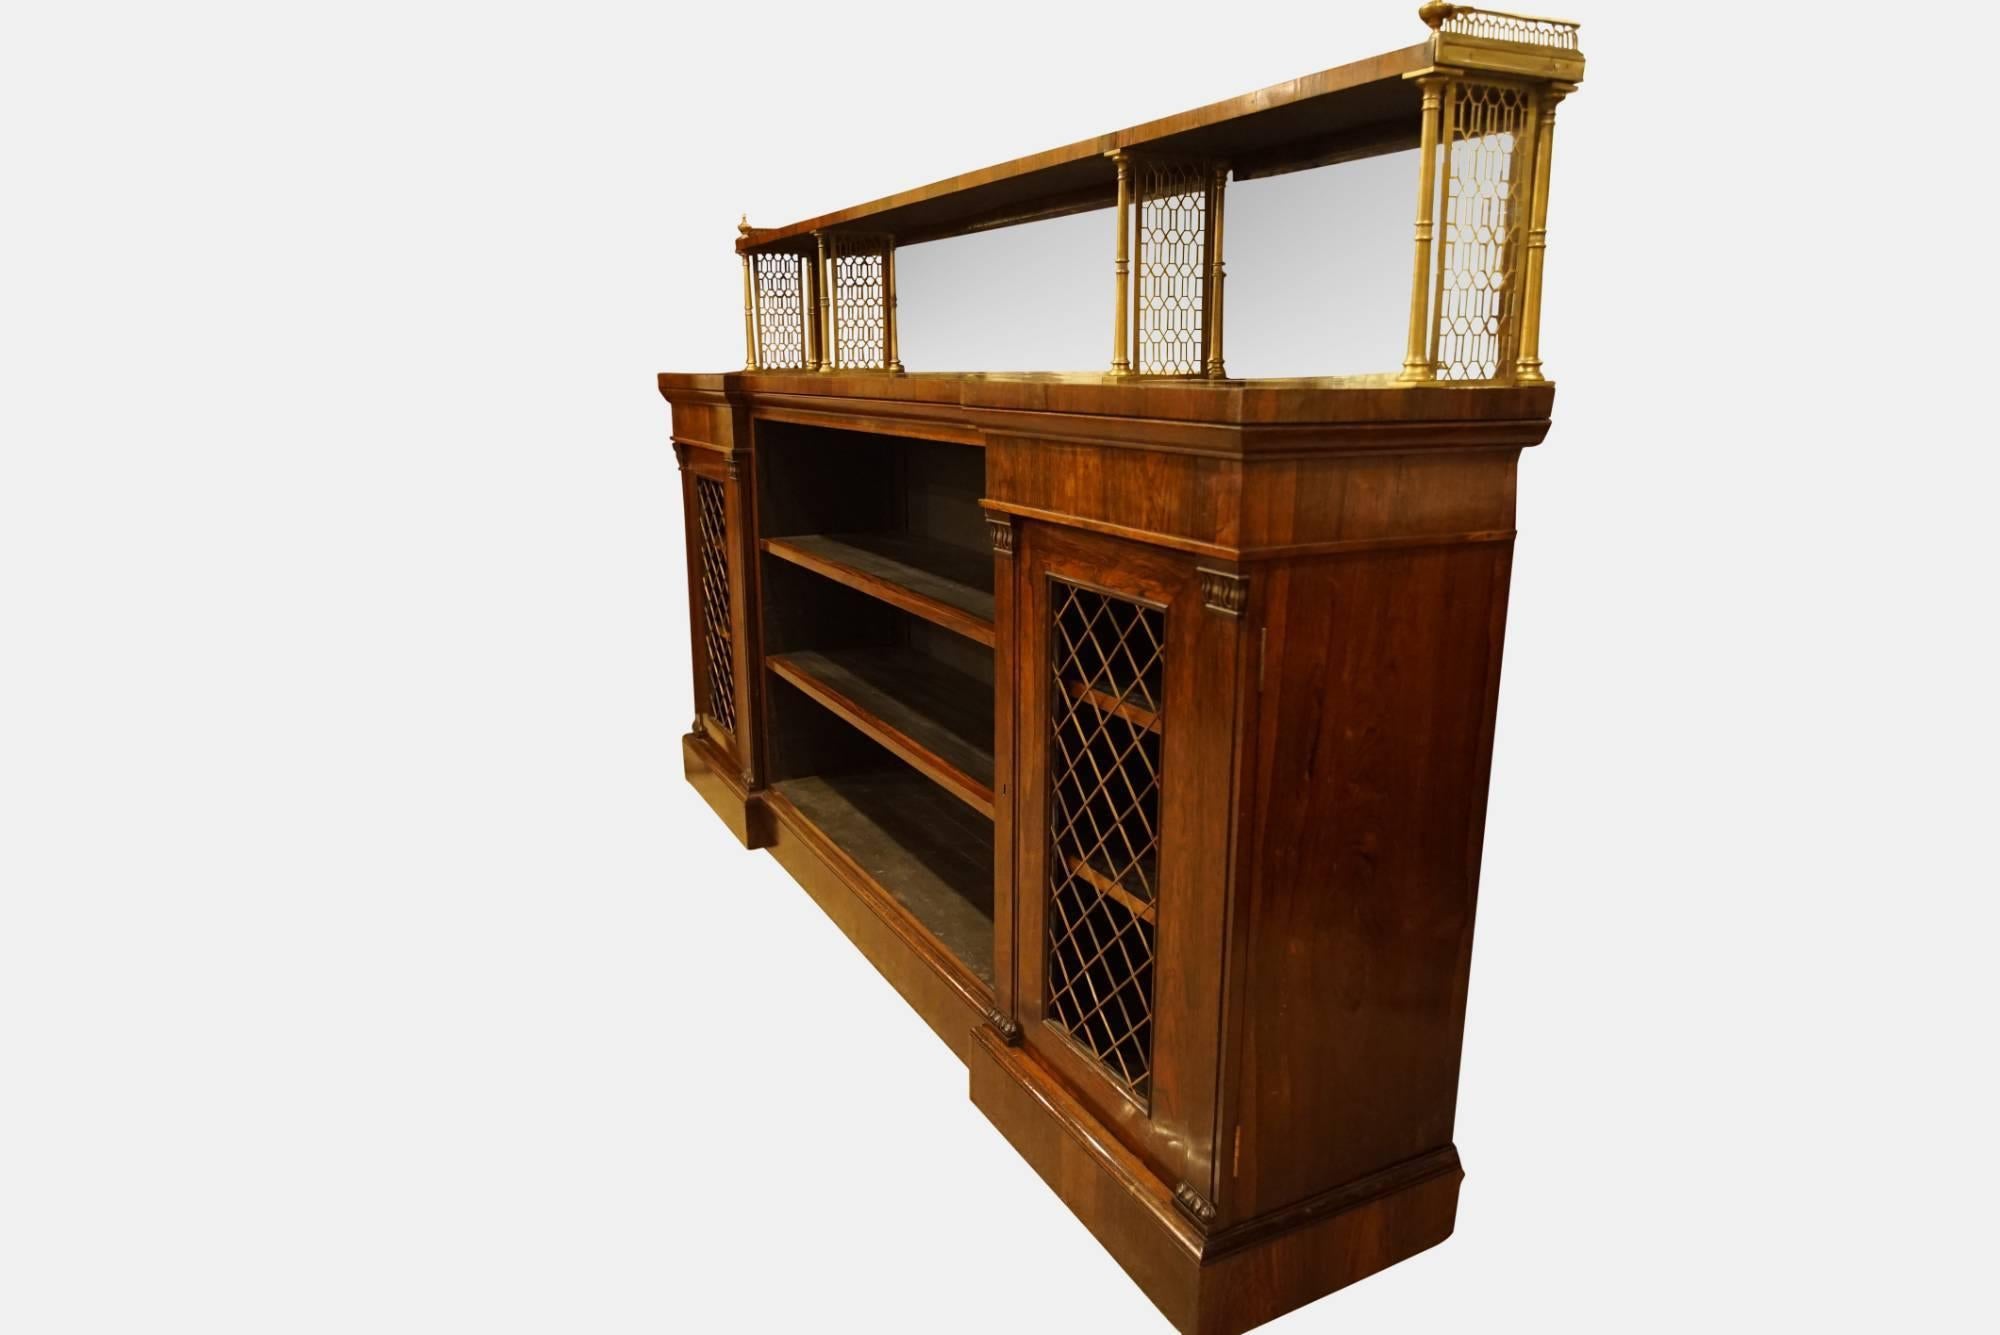 Regency rosewood and brass open bookcase with brass grills in end doors,

circa 1815.